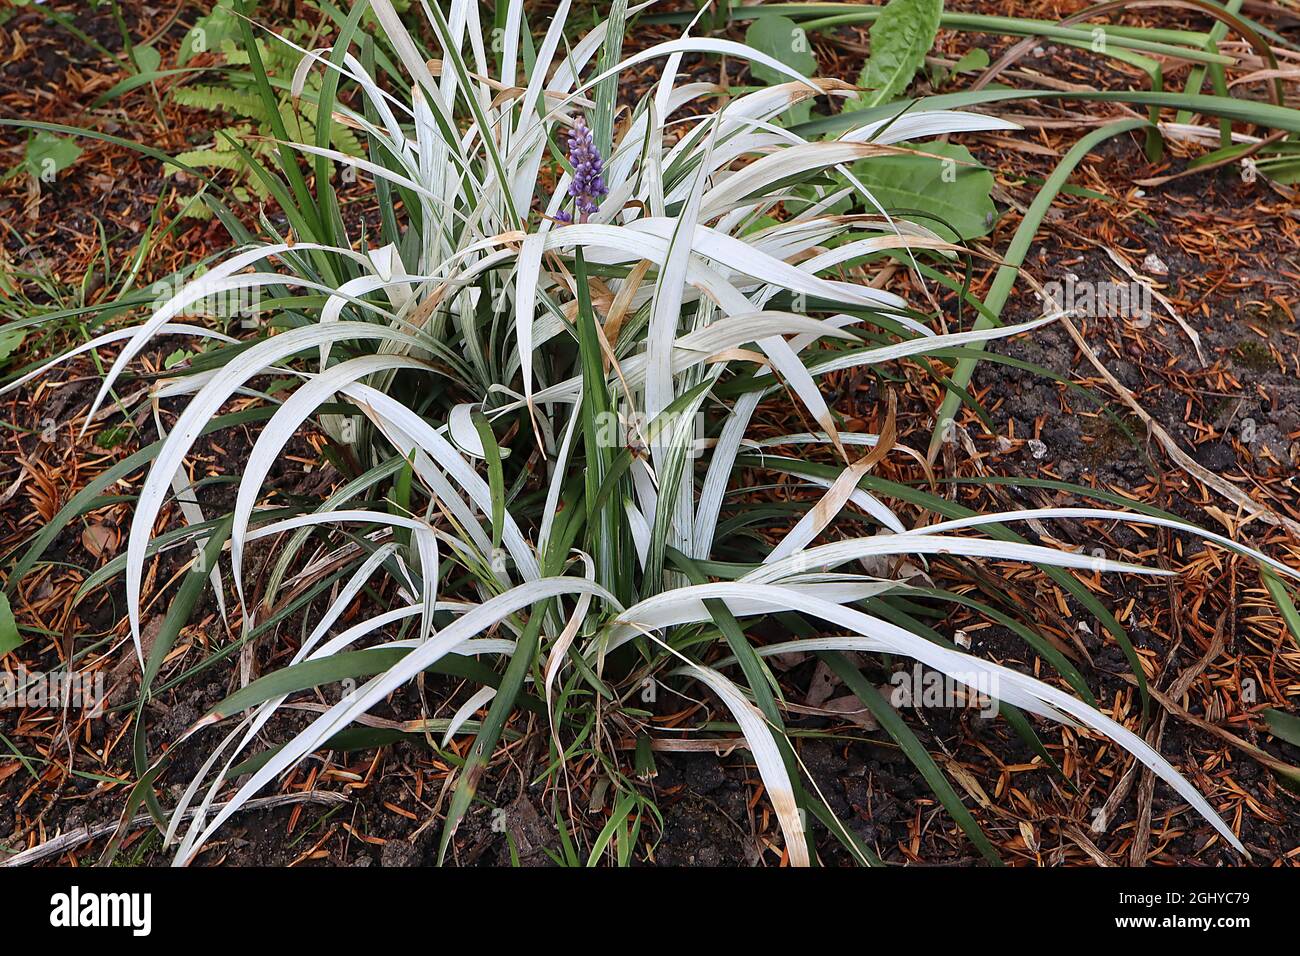 Liriope muscari ‘Okina’ lilyturf Okina – dense clusters upright racemes of small violet flowers, arching white leaves with green leaf backs,  August, Stock Photo